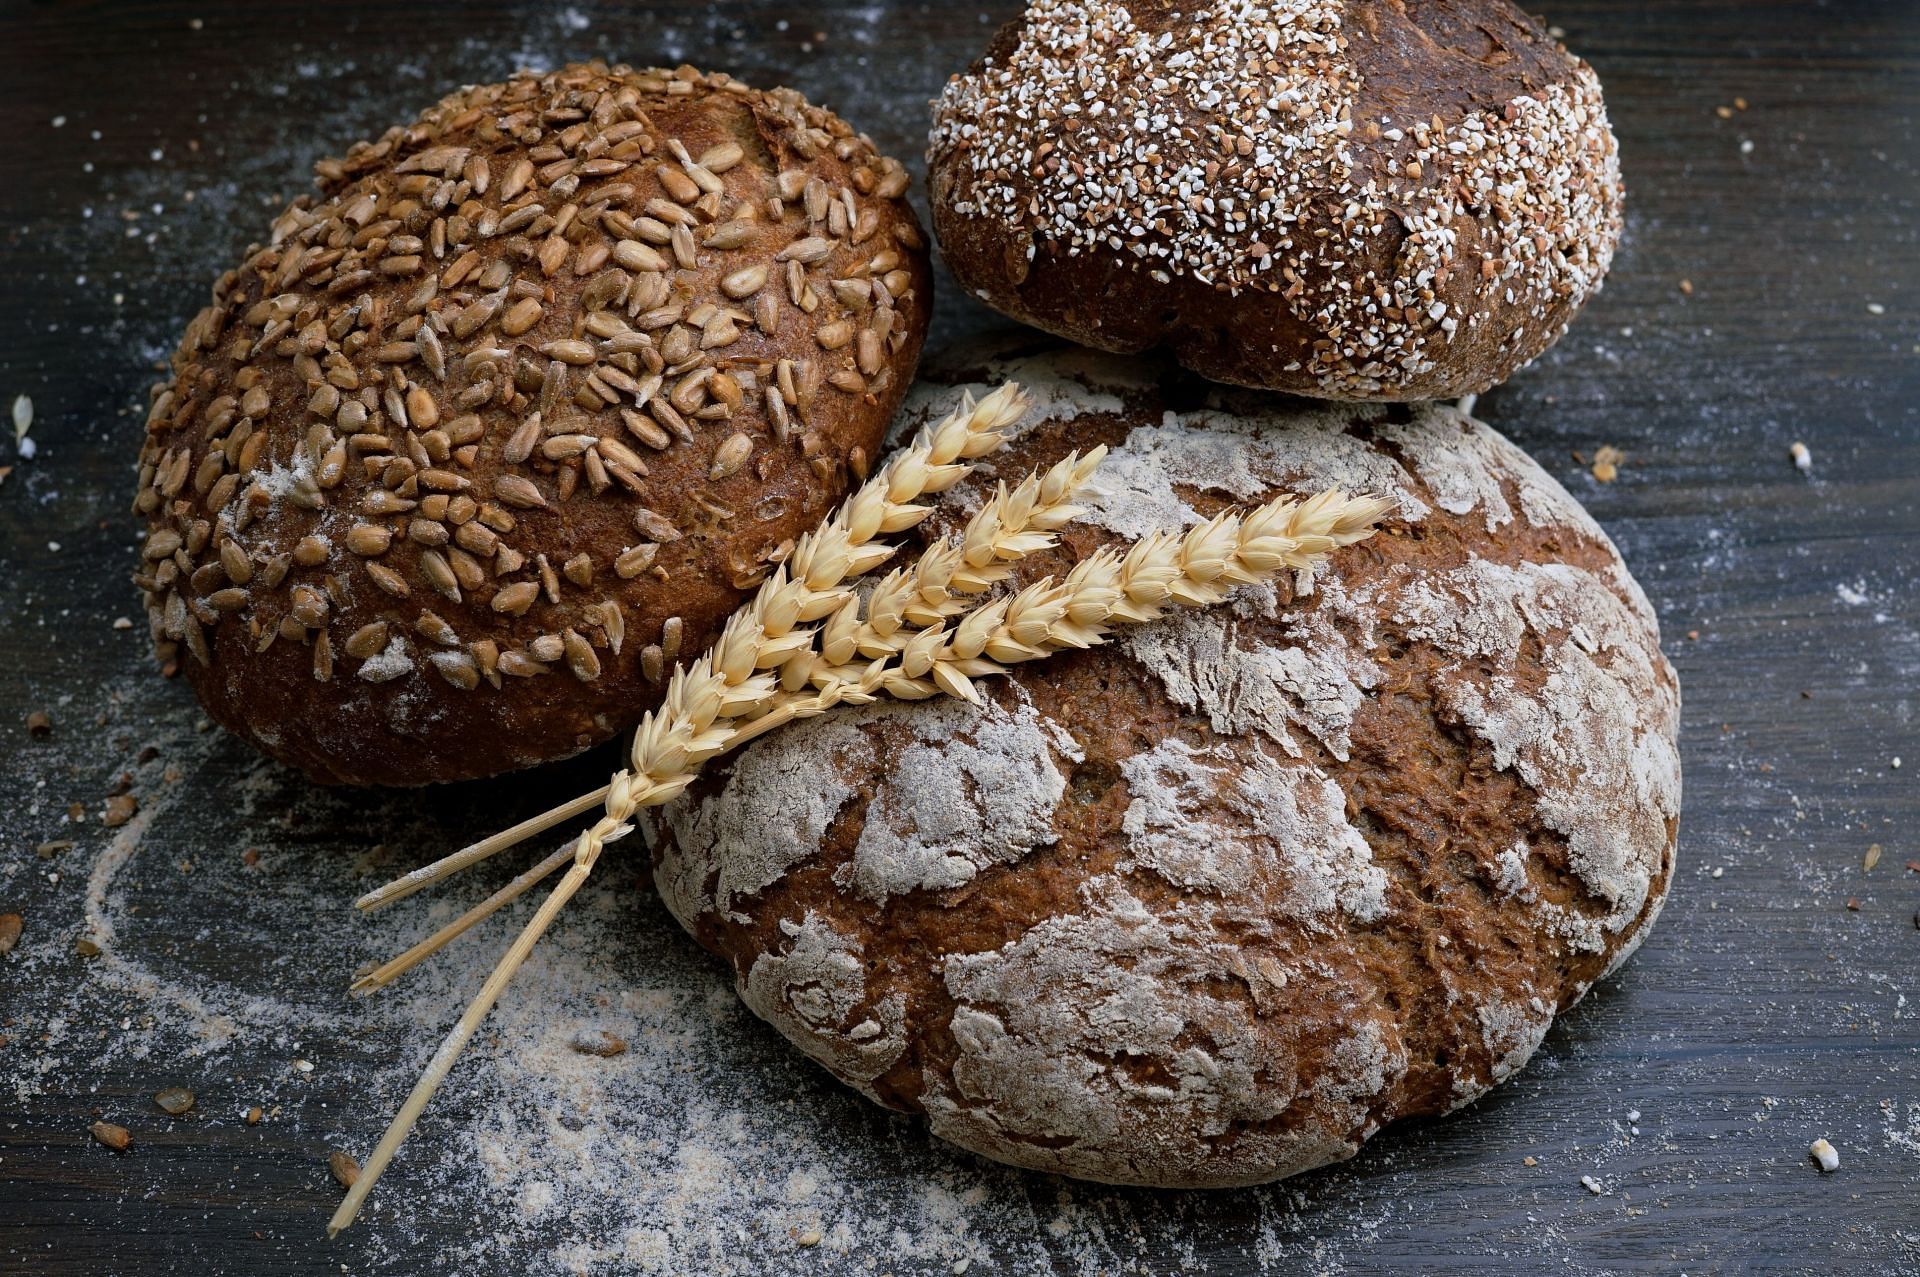 A diet high in whole grains has been linked to a longer life. (Image via Unsplash/Wesual Click)